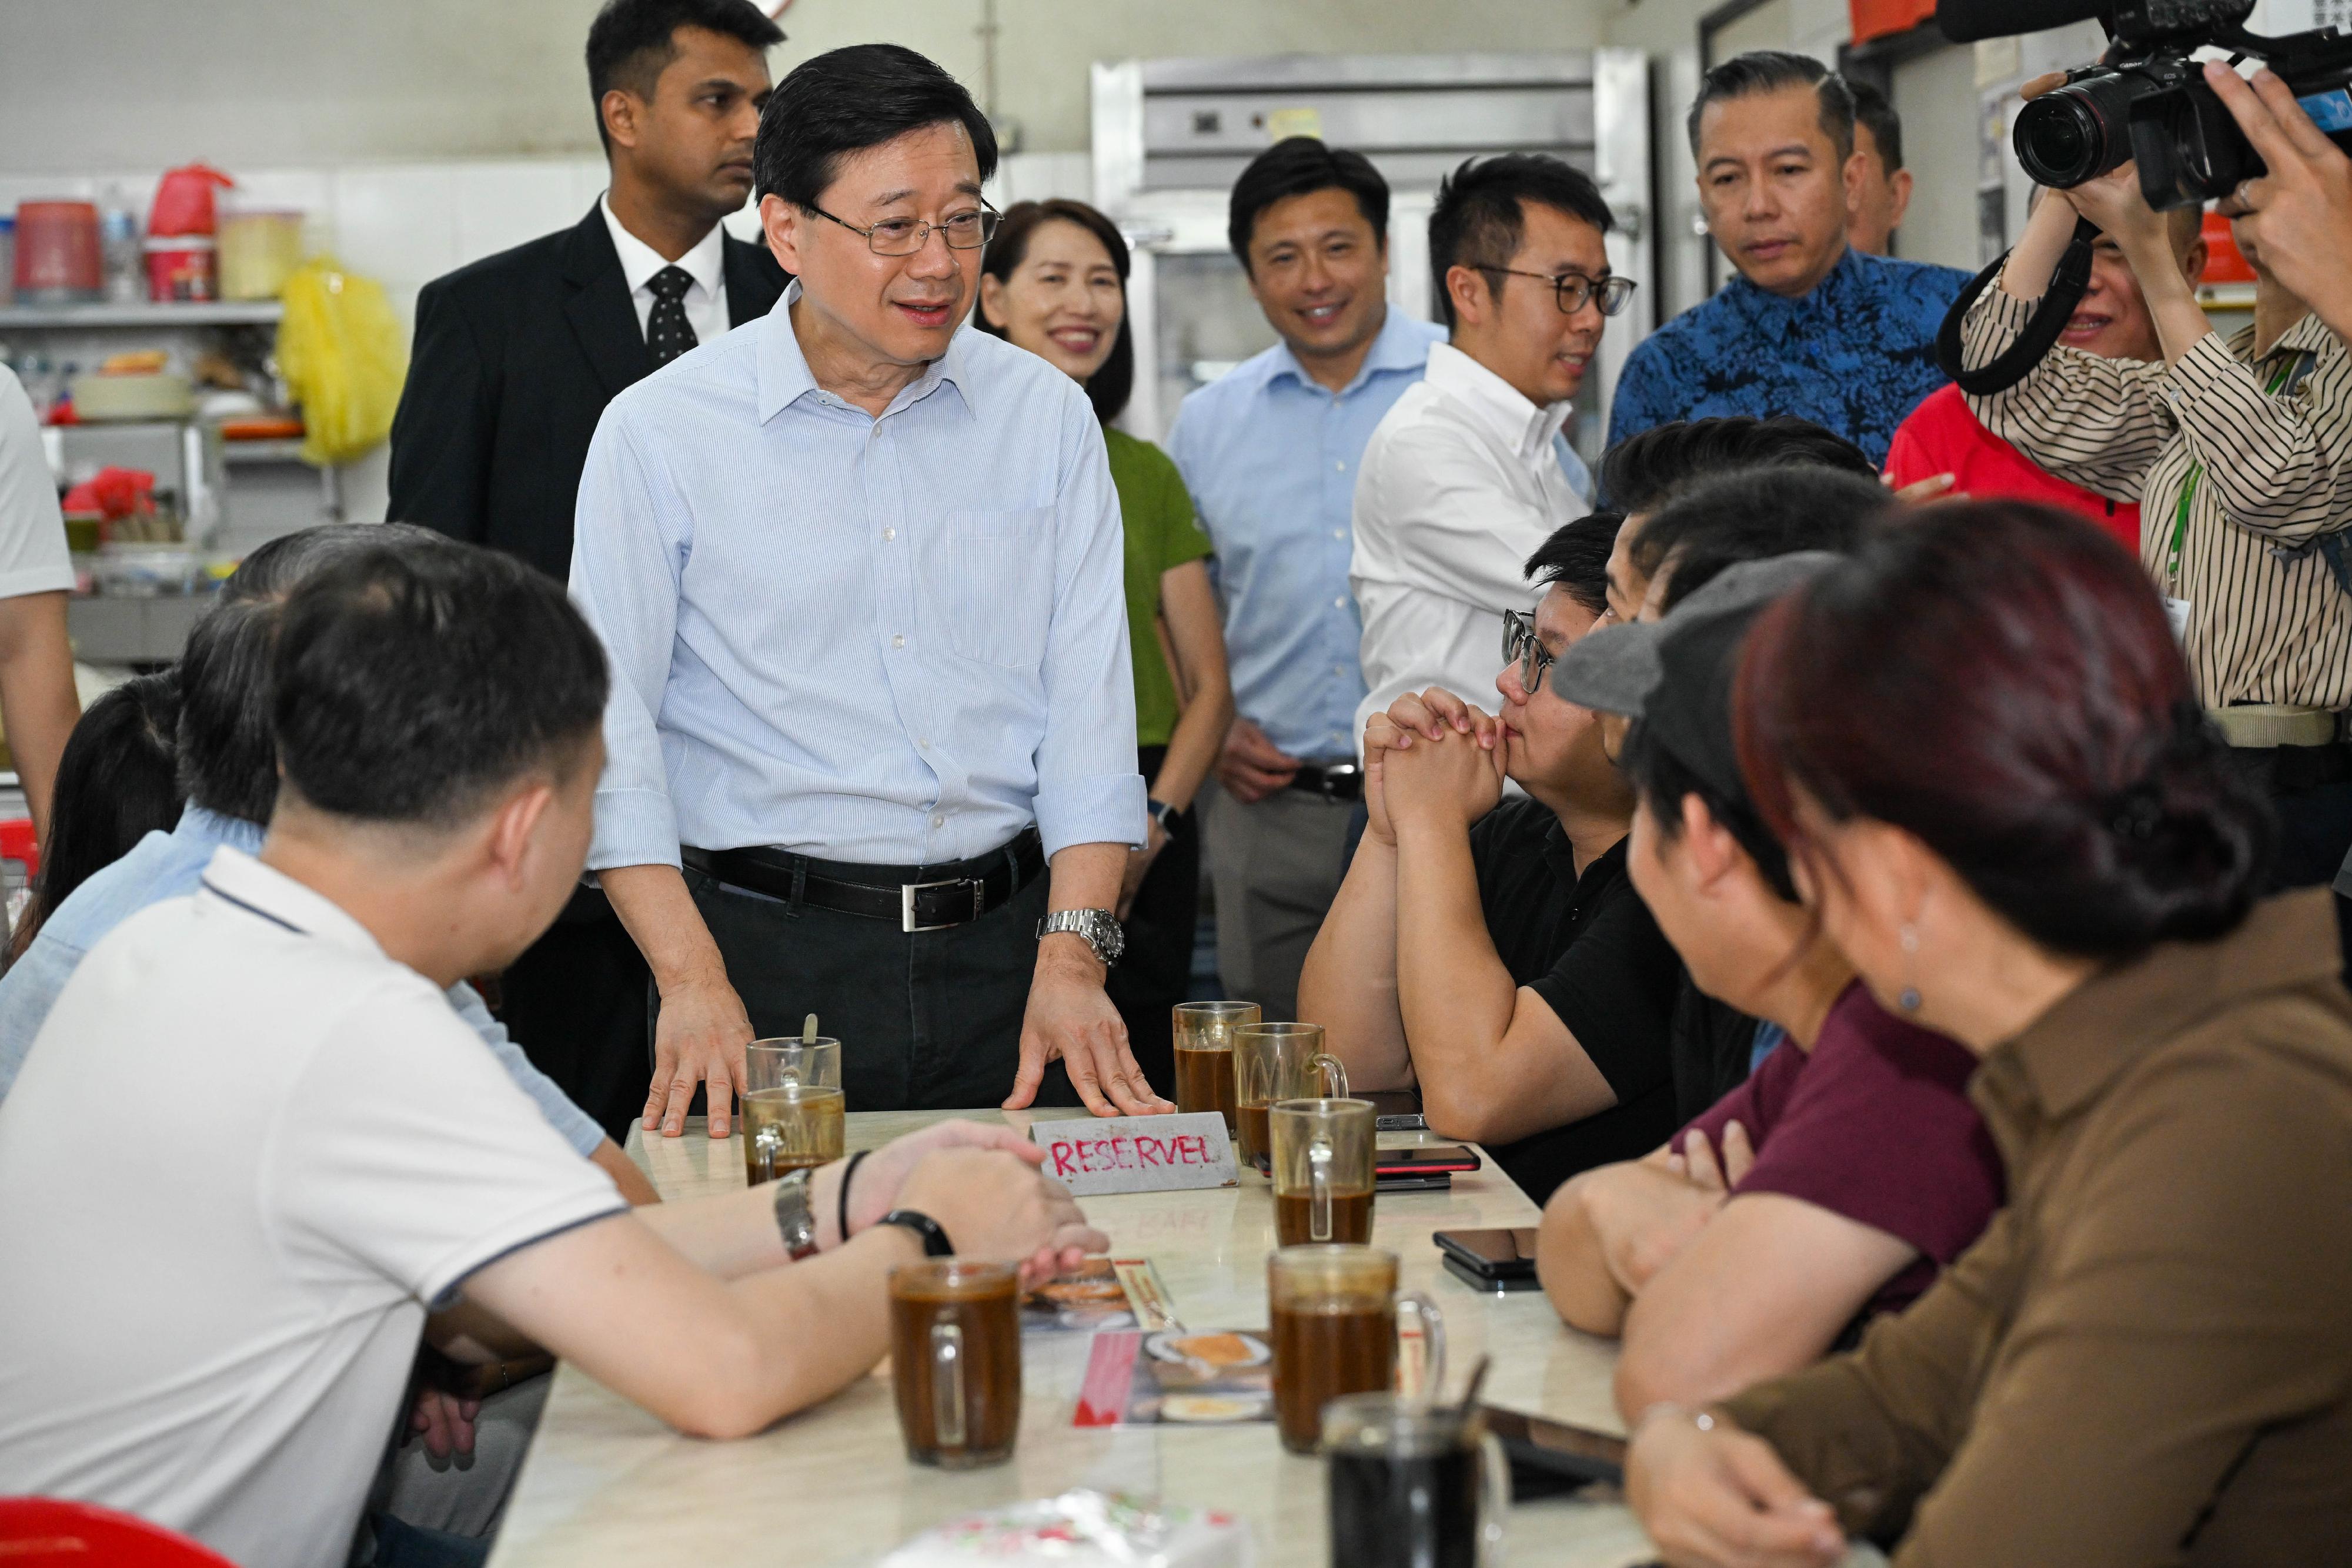 The Chief Executive, Mr John Lee, enjoyed a local breakfast at a hawker centre in Kuala Lumpur, Malaysia today (July 28). Photo shows Mr Lee interacting with local residents.